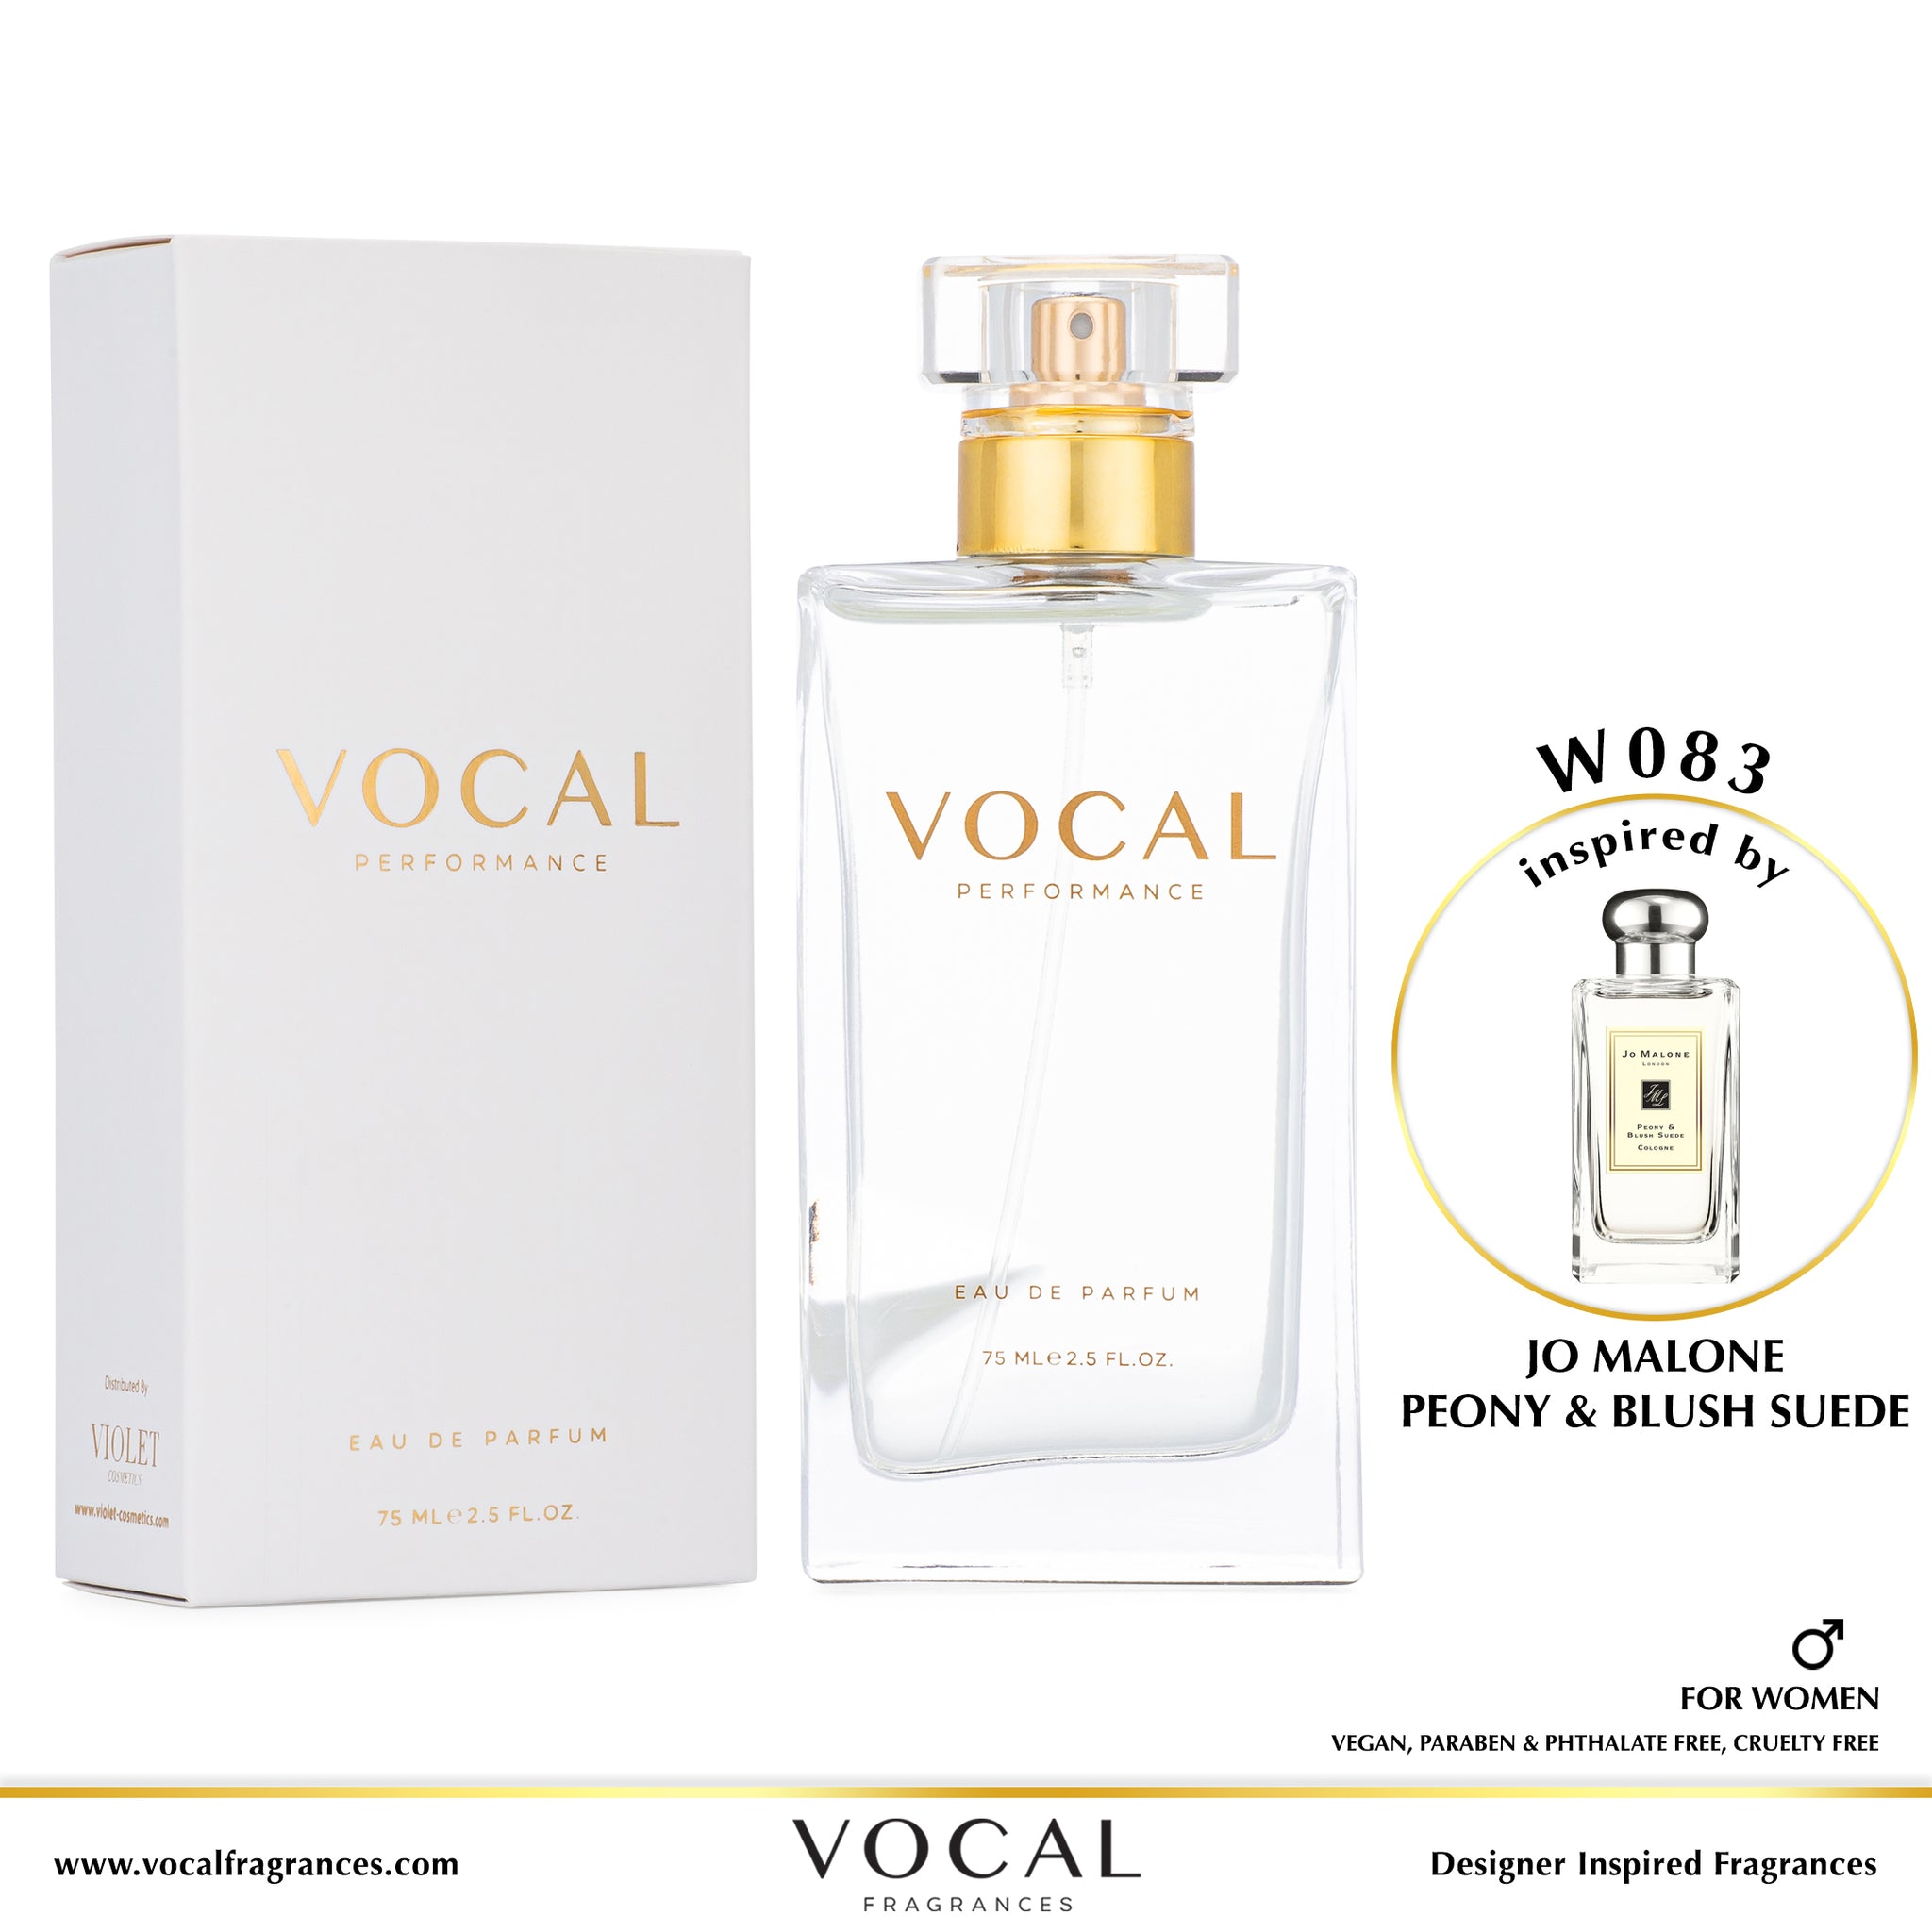 W083 Vocal Performance Eau De Parfum For Women Inspired by Jo Malone Peony & Blush Suede